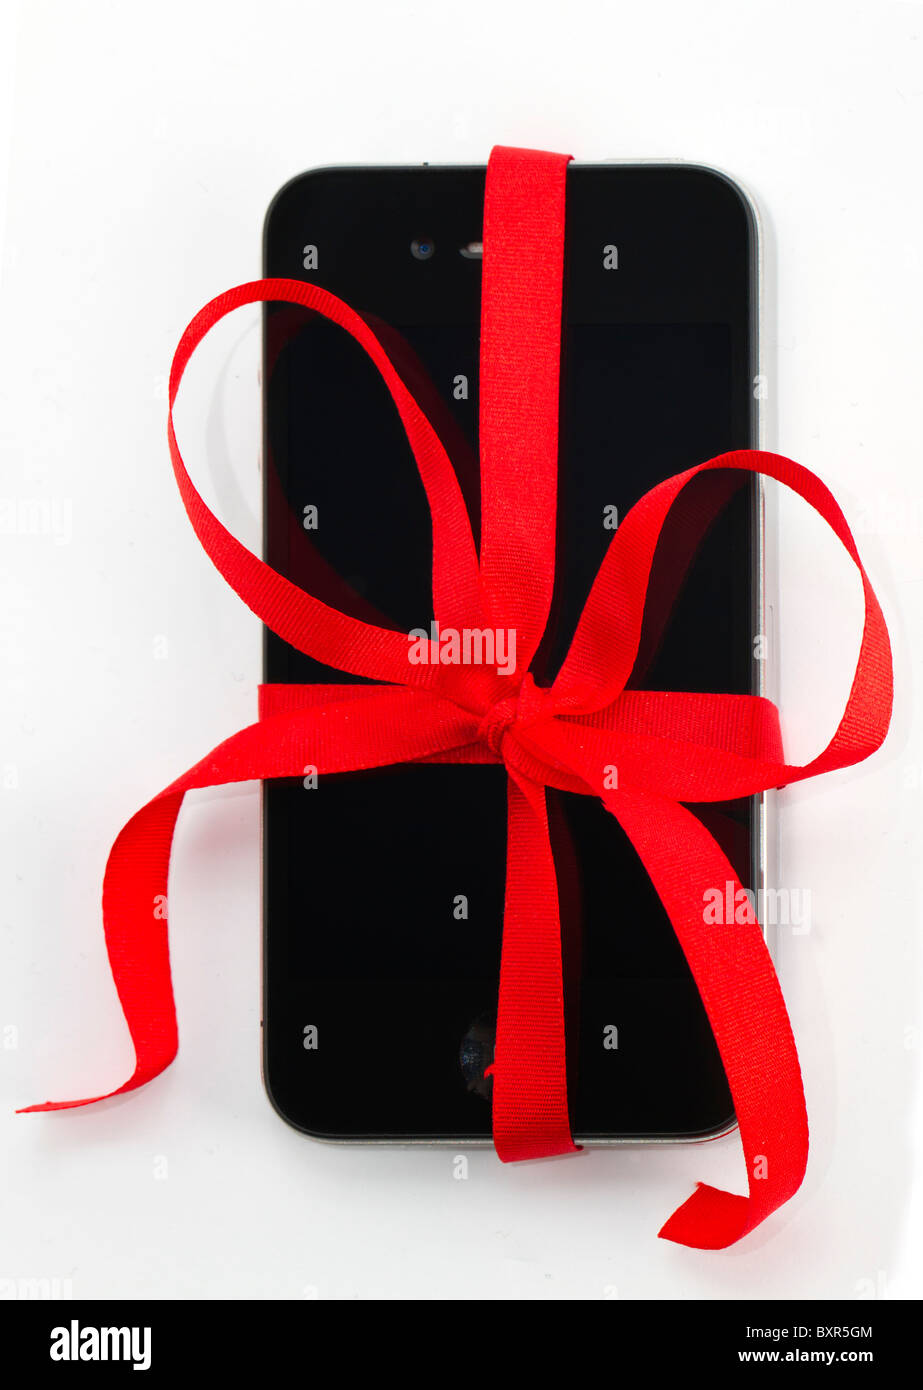 Apple iPhone 4 with a red gift bow. Stock Photo